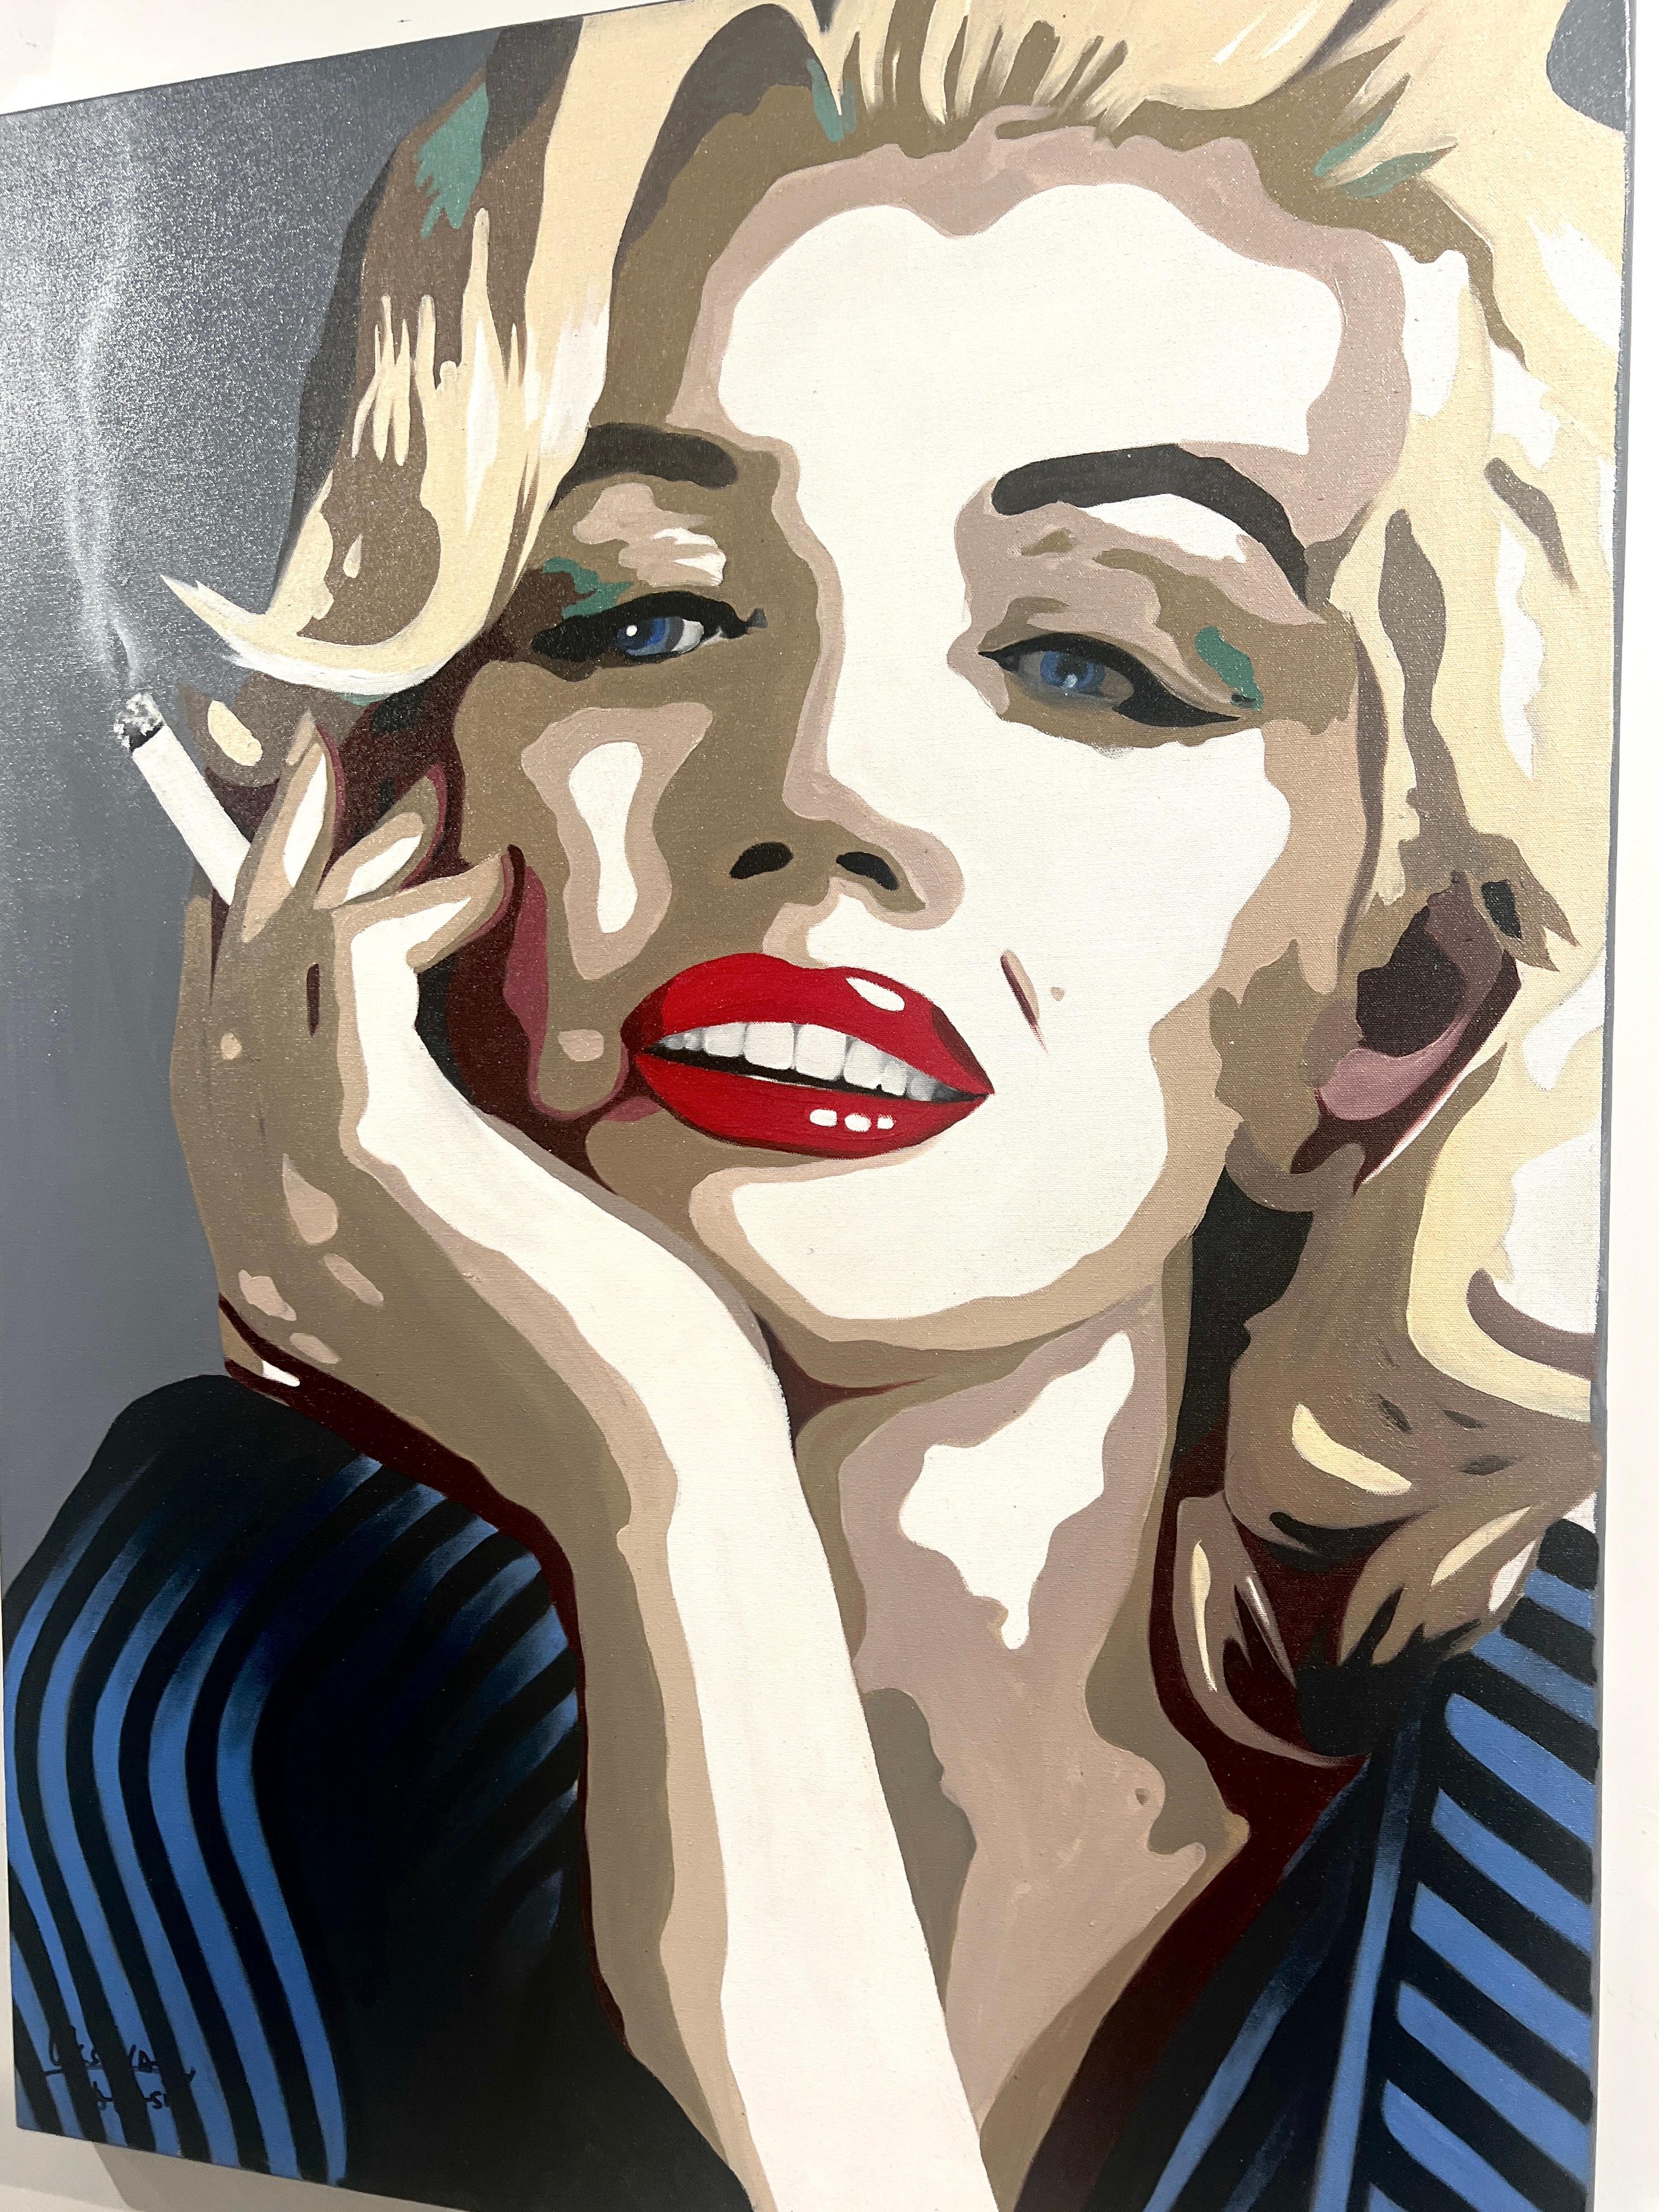 Marilyn Monroe 7 is original oil on canvas created by Oksana Tanasiv in 2022. The size of canvas 30